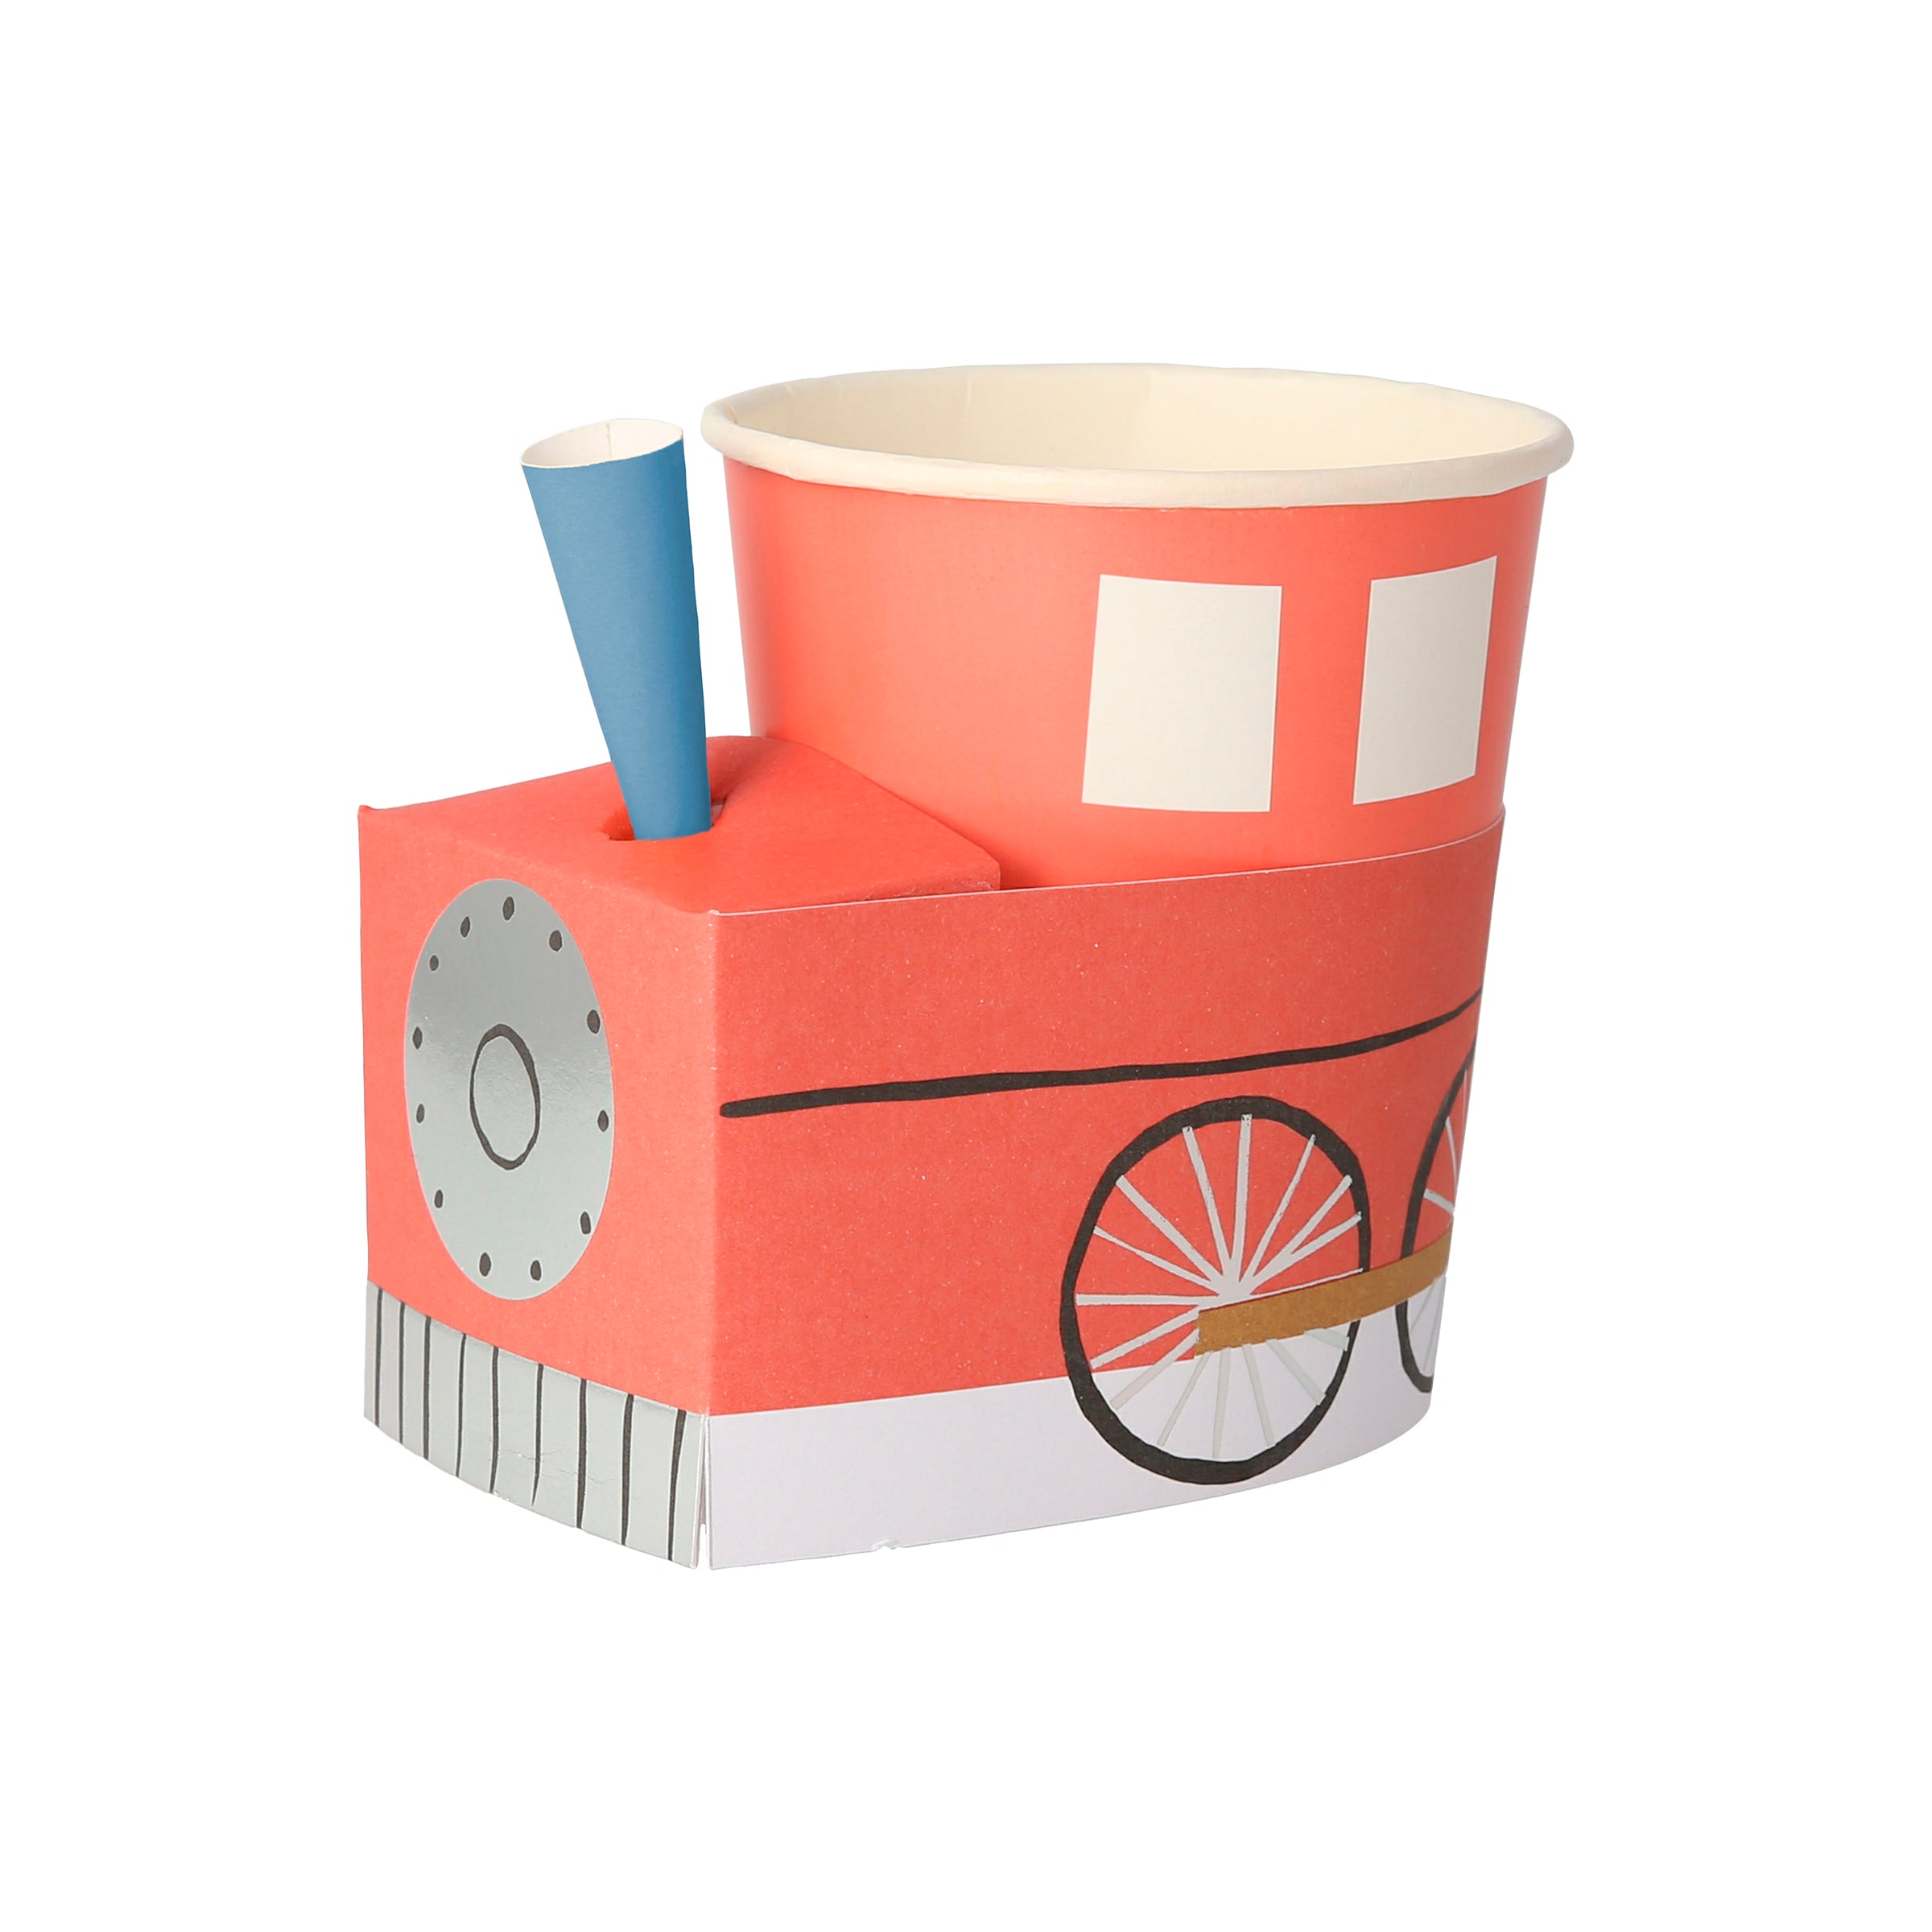 Our paper cups, in the shapes of trains, are ideal for a train party.